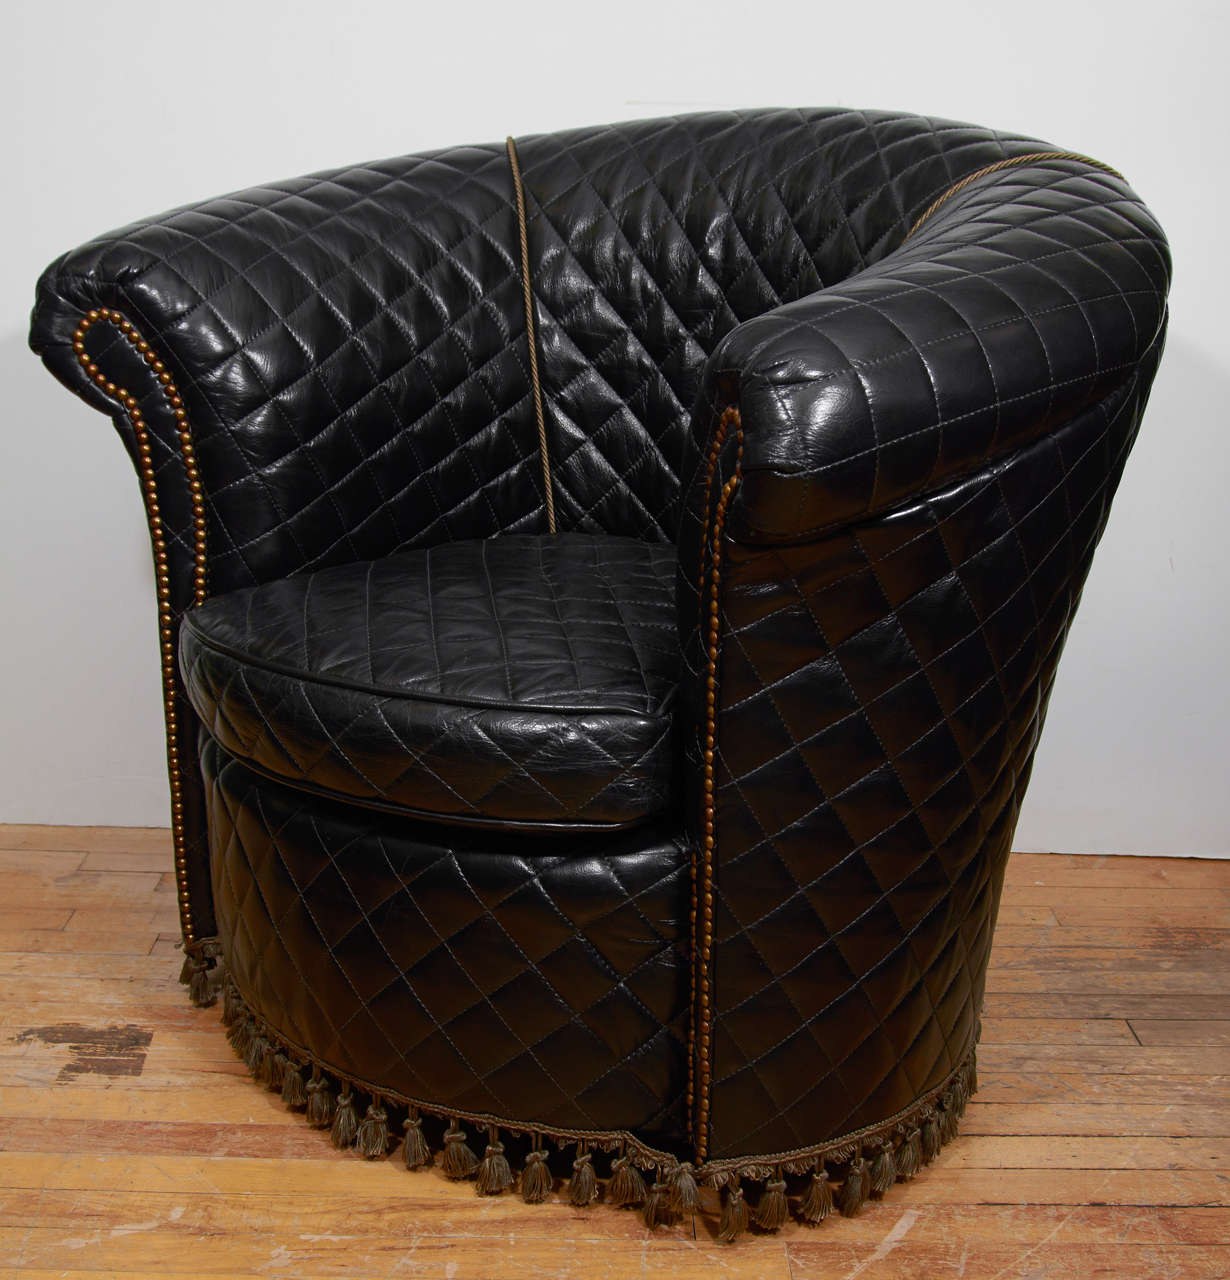 A vintage barrel-back lounge chair in black leather with diamond quilting. The arms have brass nail detailing and there is tassel around the base.